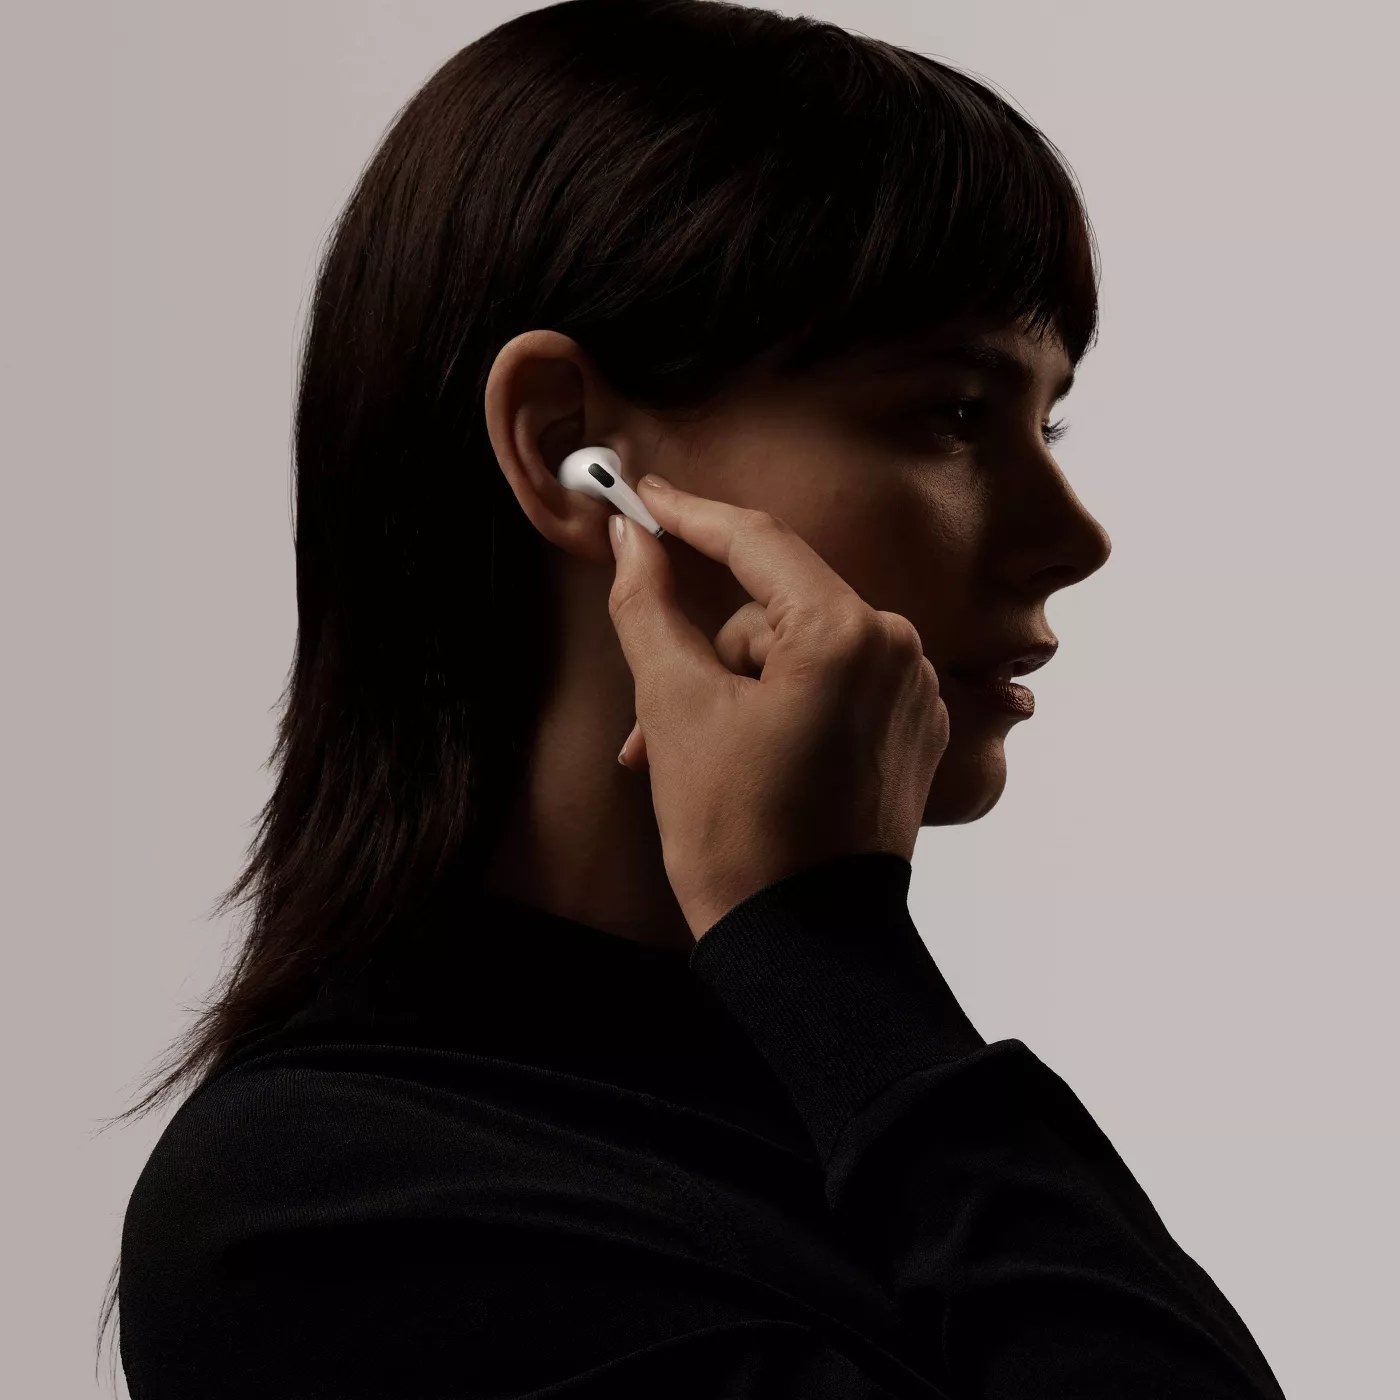 A model inserting an Airpod into their ear